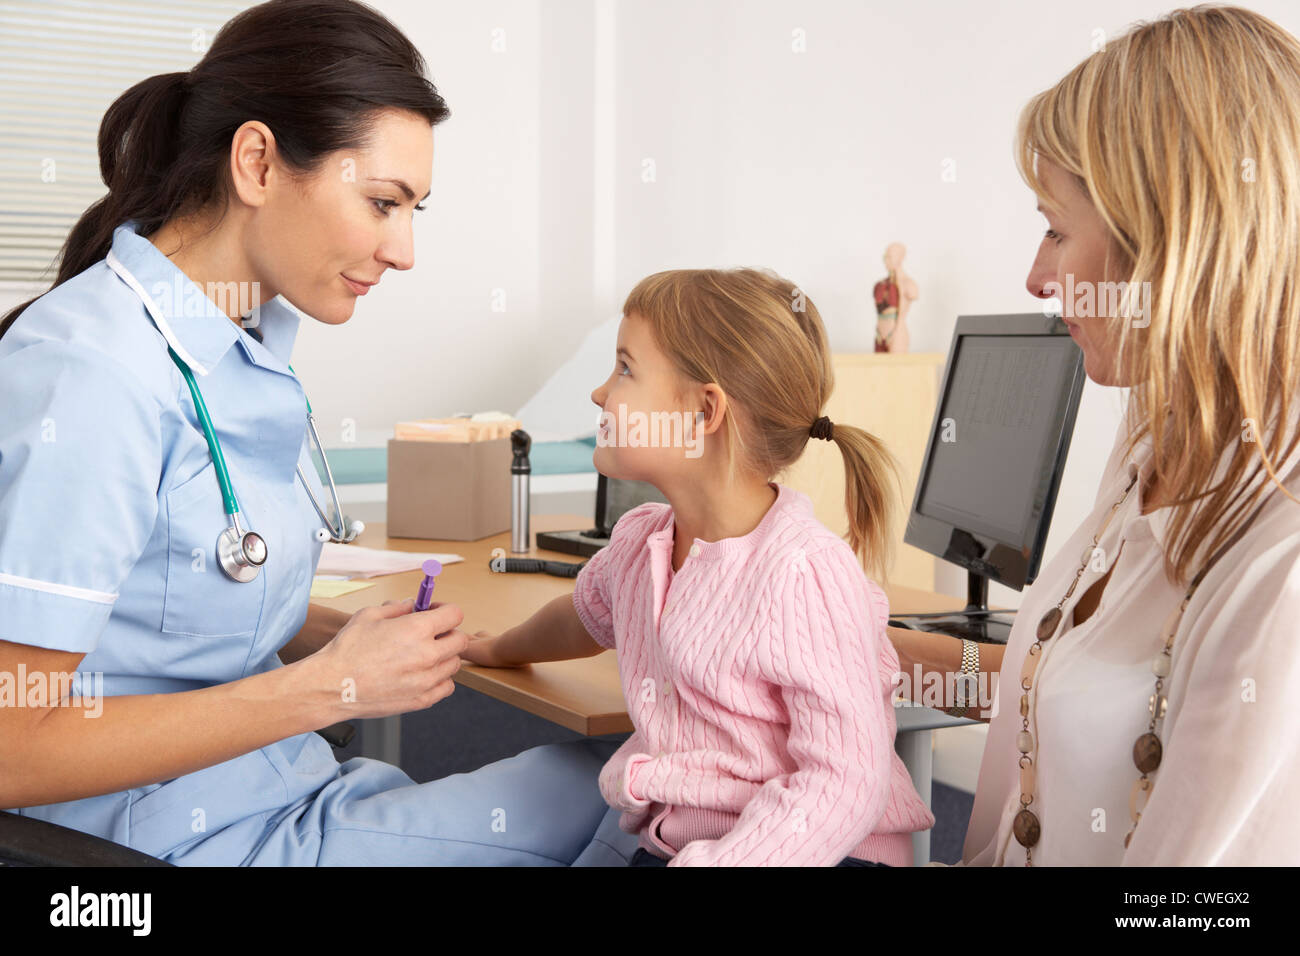 British nurse about to inject young child Stock Photo